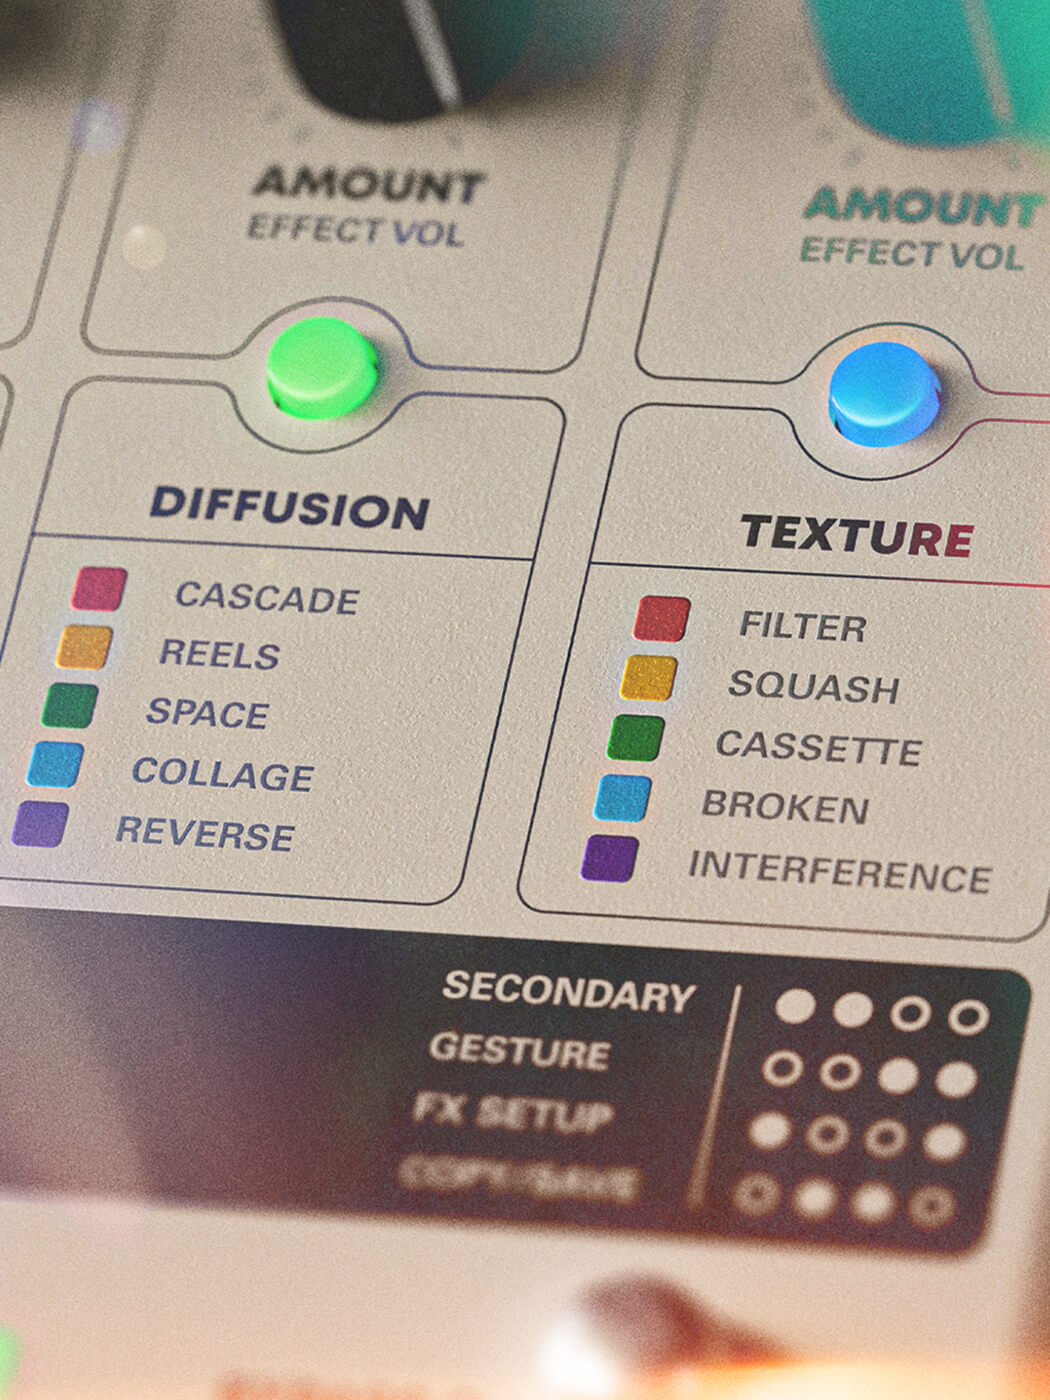 Diffusion and Texture modules on the Chroma Console